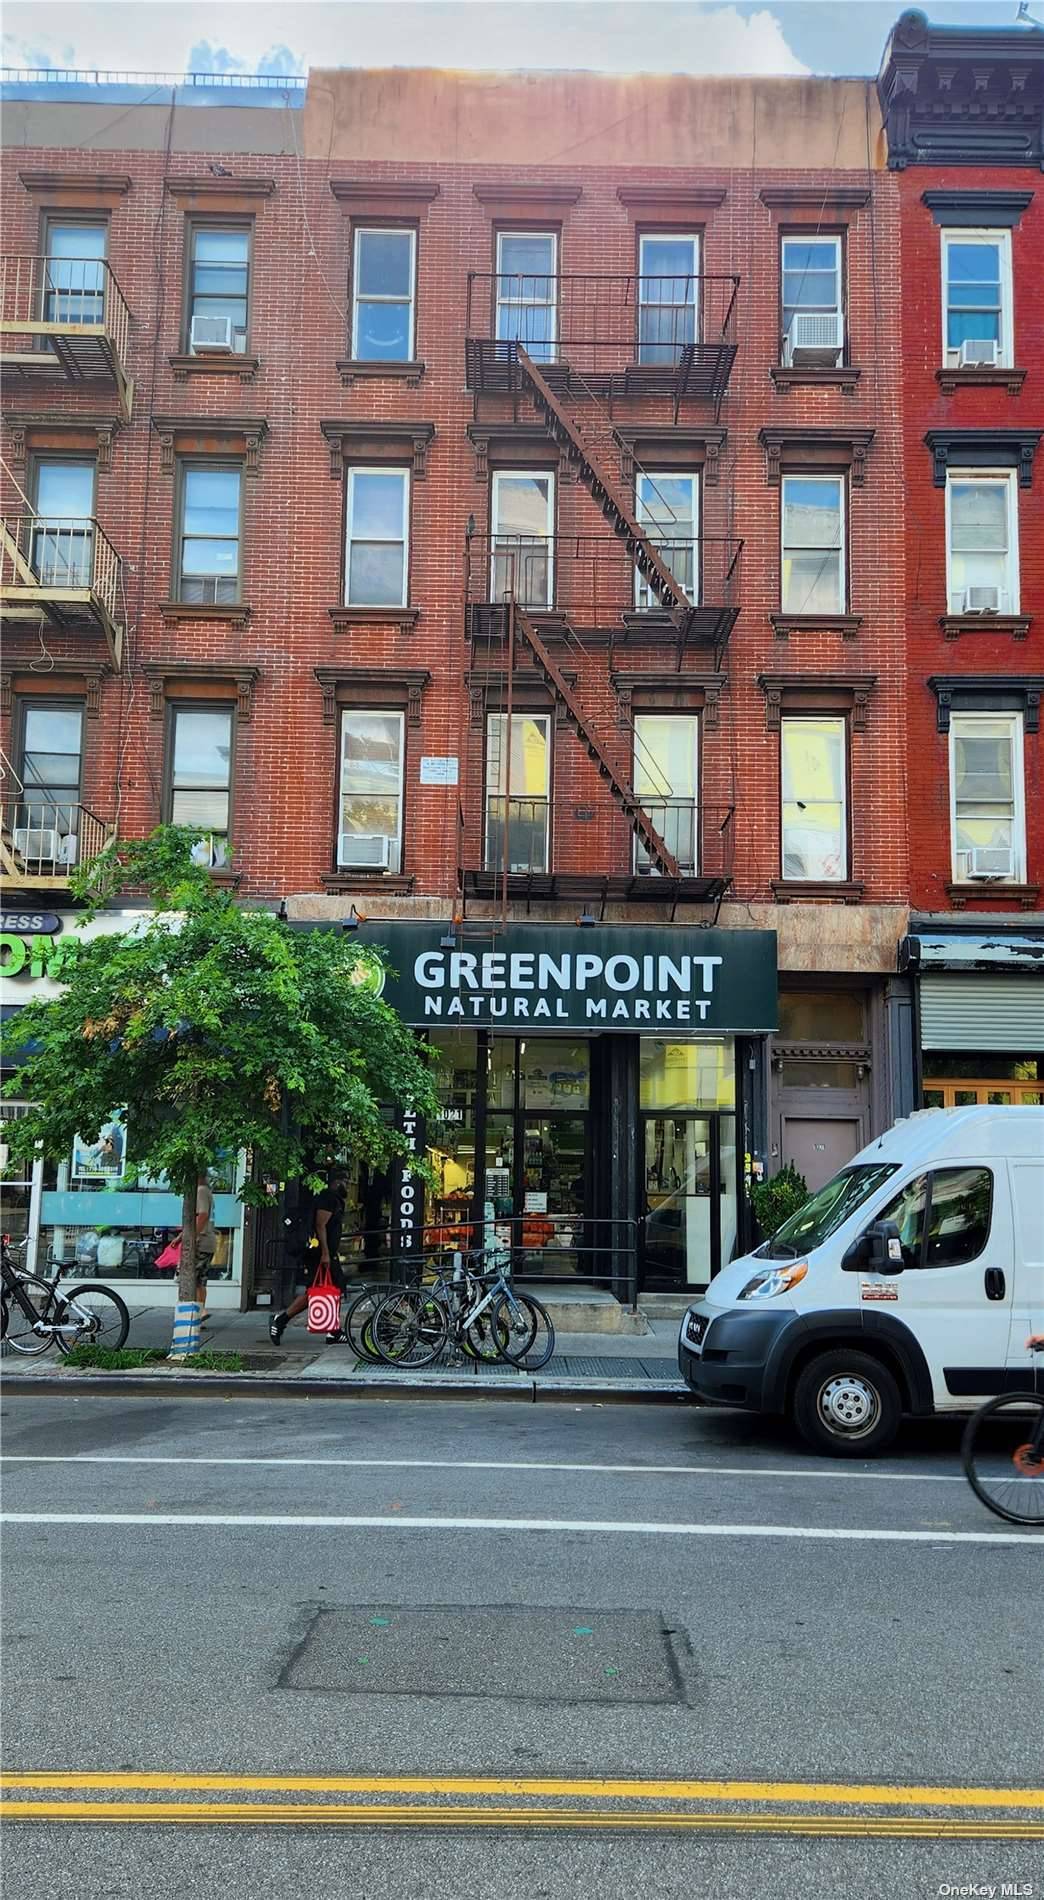 I'm happy to offer this income producing, recently updated mixed use property on the main artery of Greenpoint.